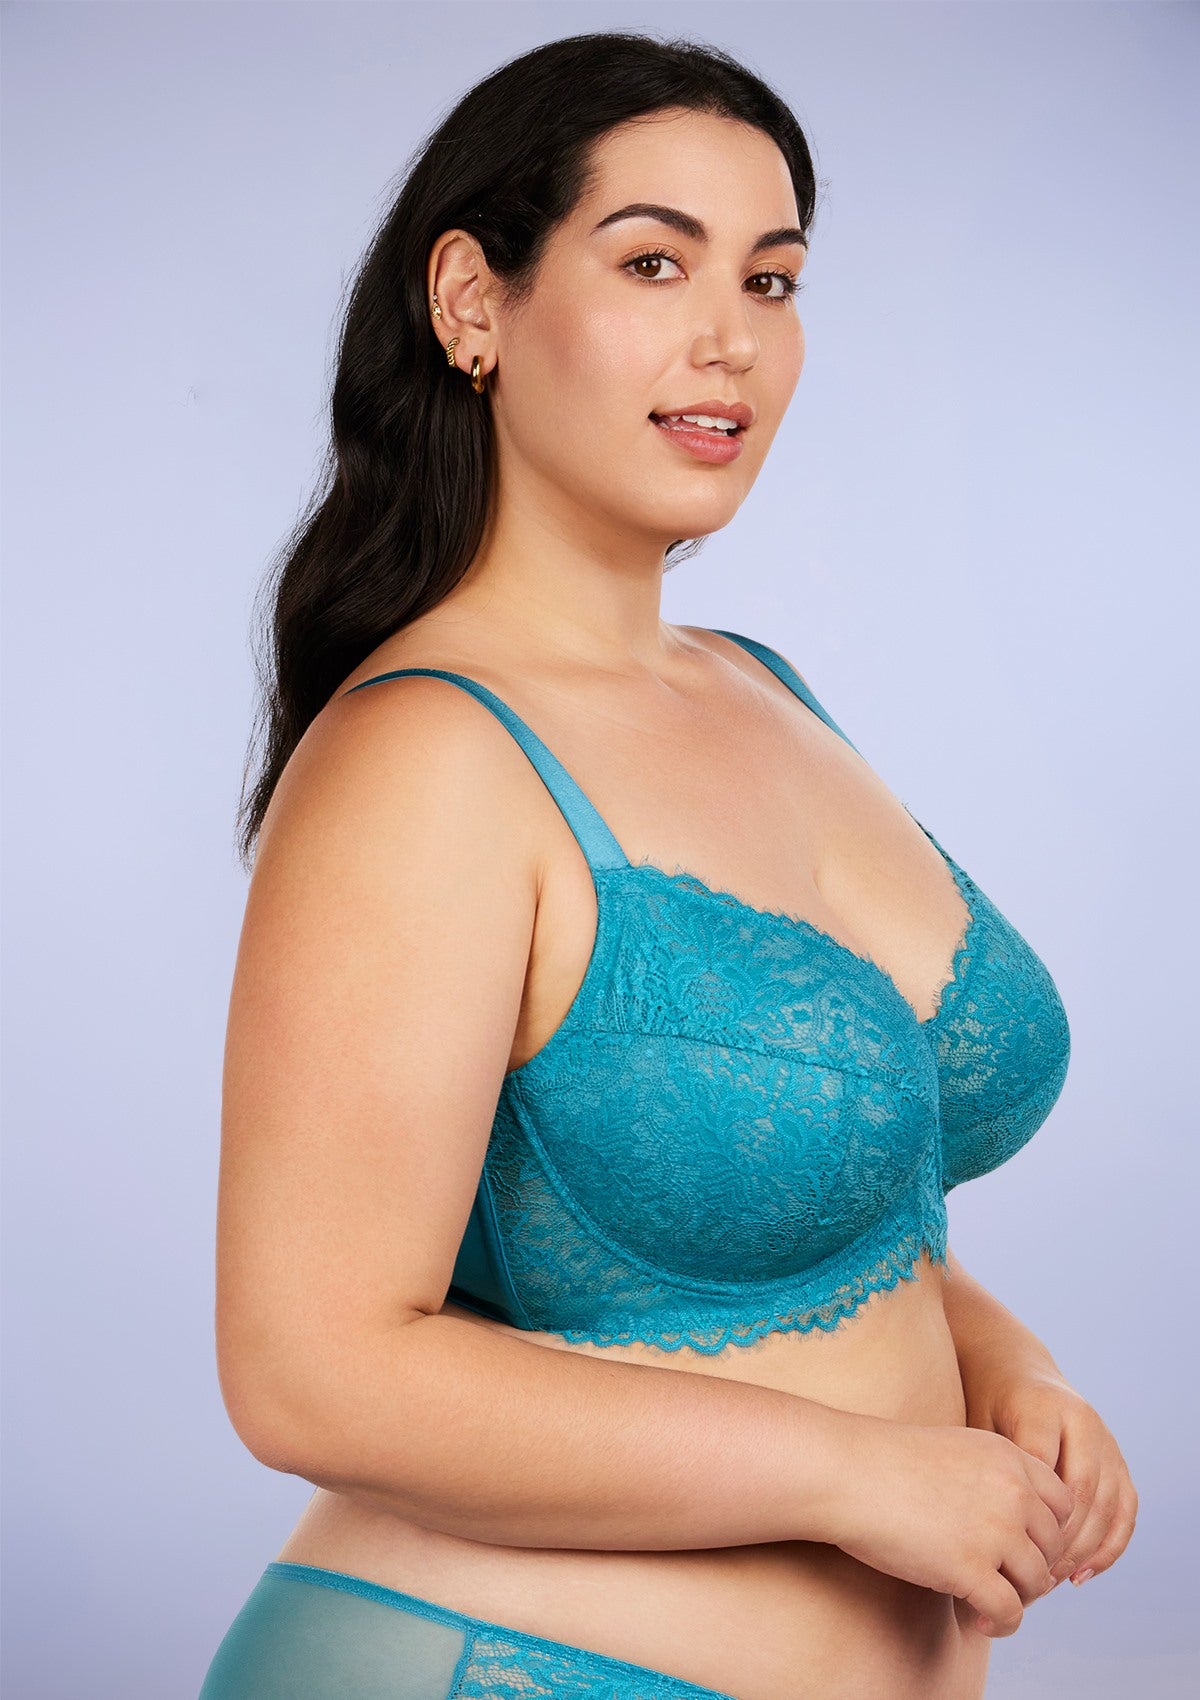 HSIA Sunflower Unlined Lace Bra: Best Bra For Wide Set Breasts - Horizon Blue / 36 / I